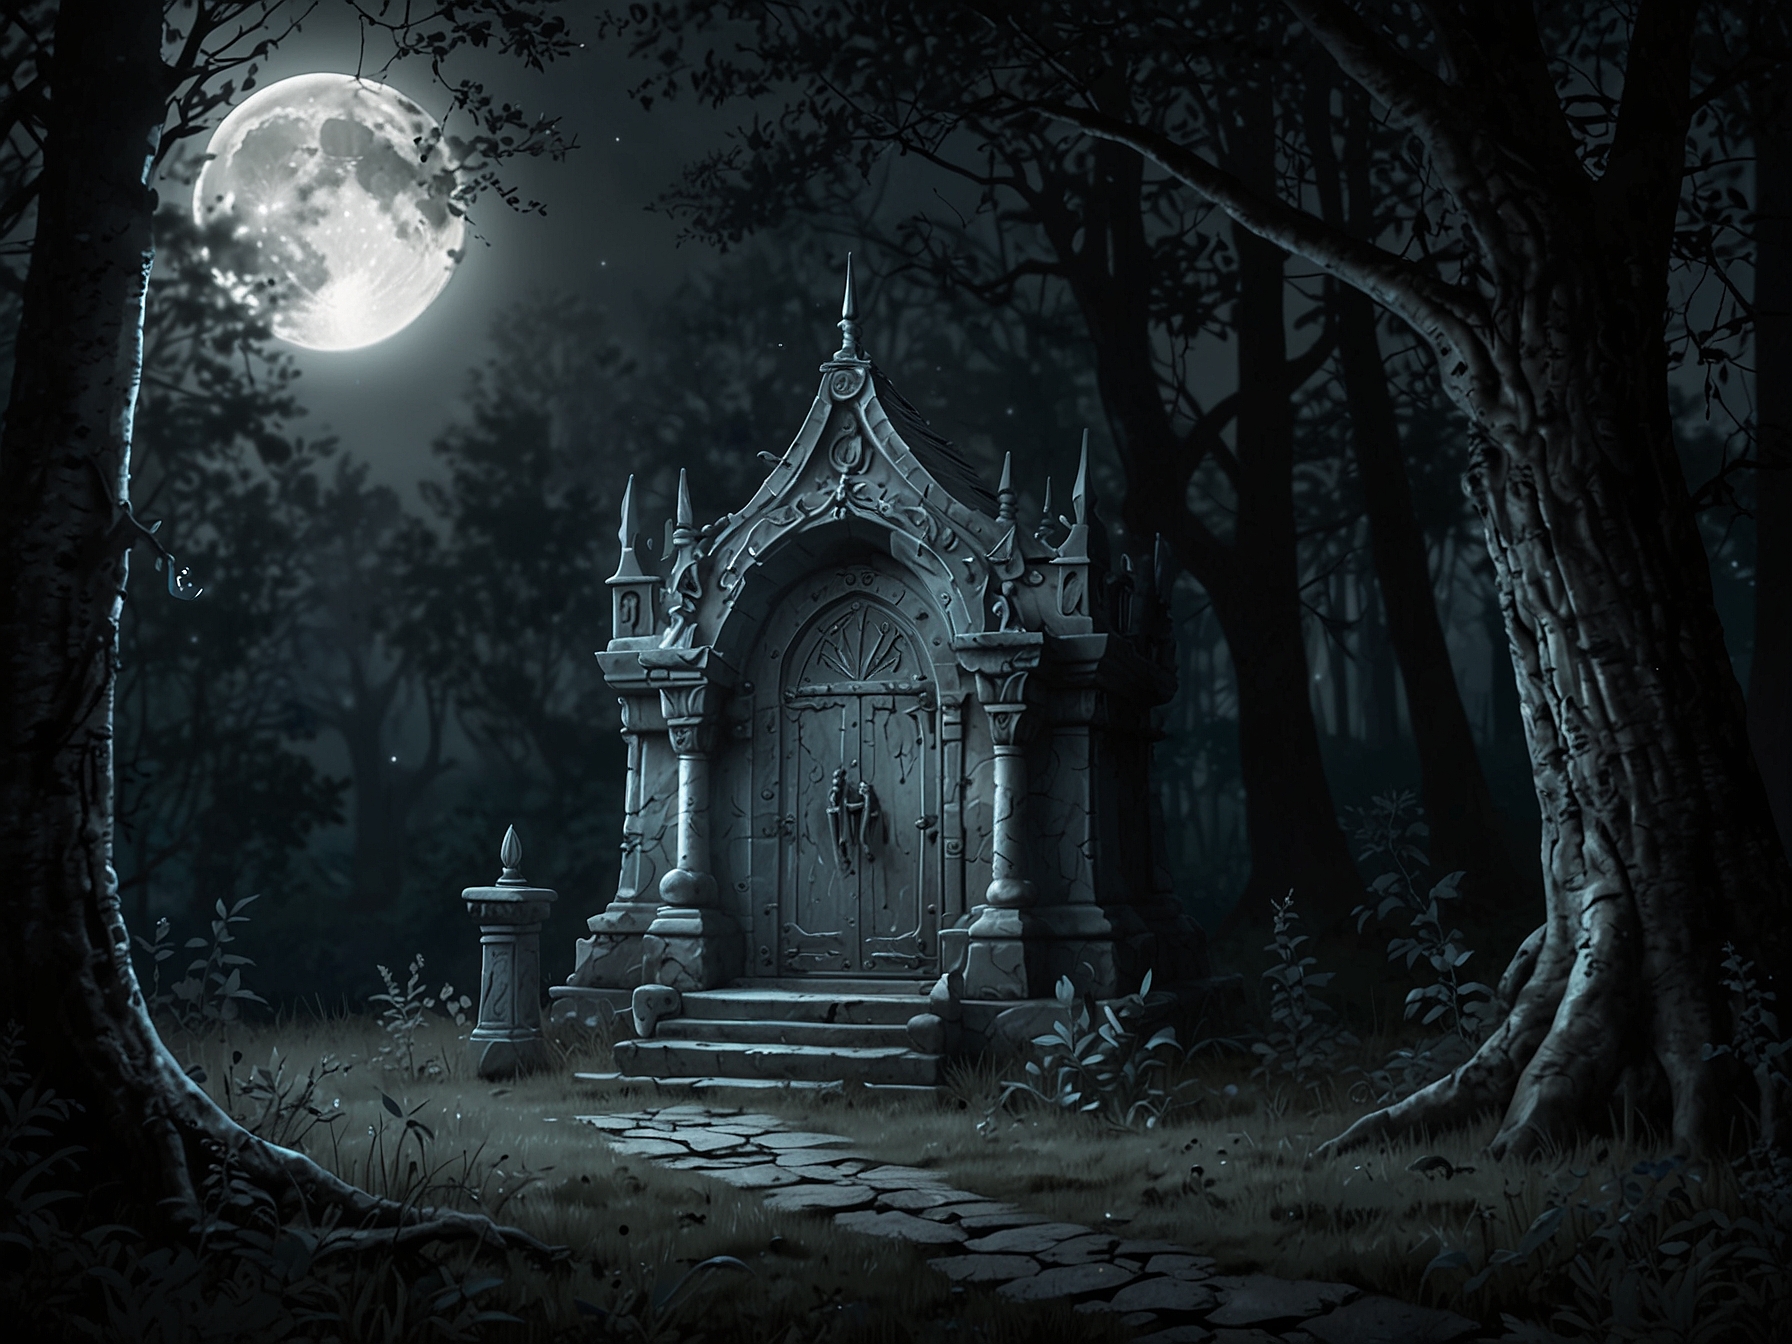 Image of the enchanted Moonlit Shrine in the Enchanted Forest, where the 'Moonlit Restoration' spell can be found, guarded by mystical moon spirits.